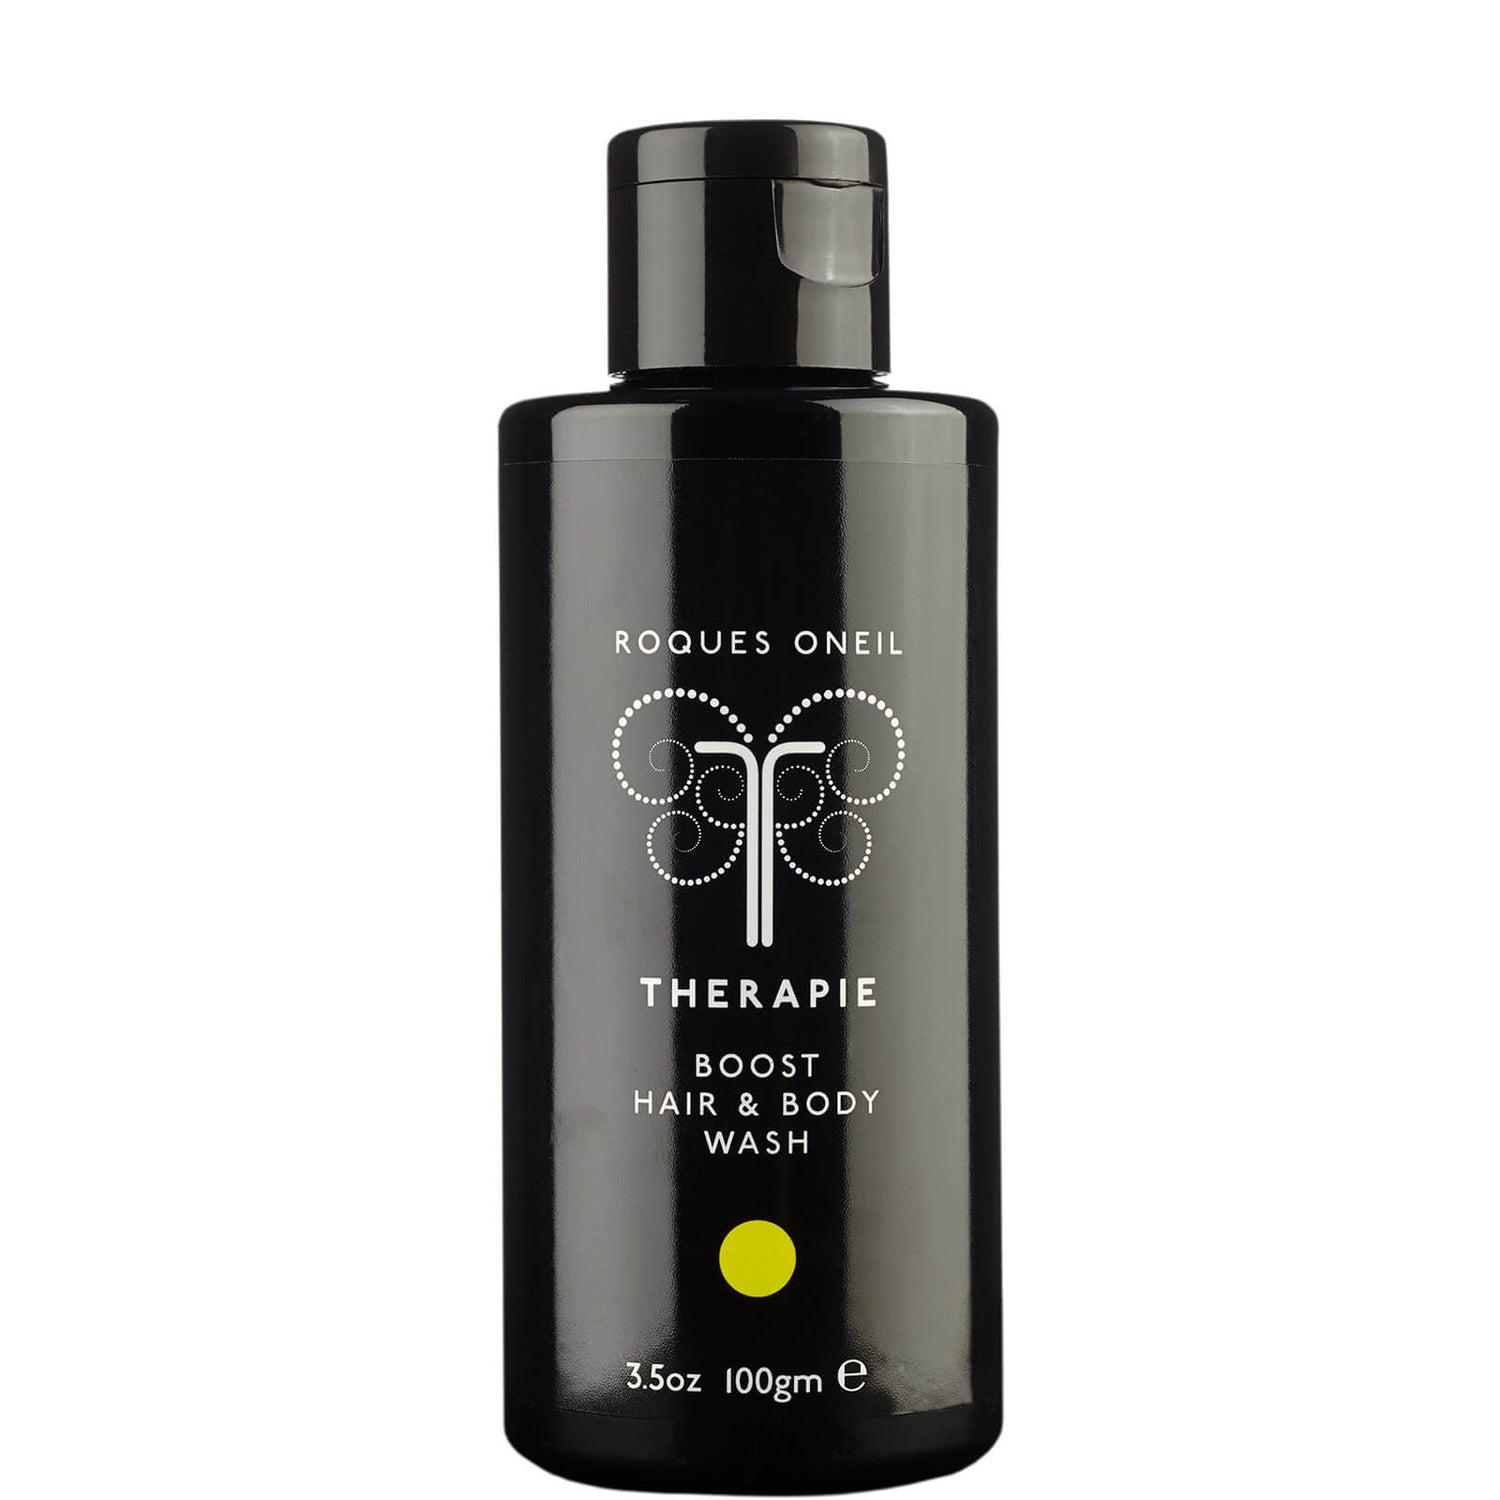 Therapie Boost Hair & Body Wash